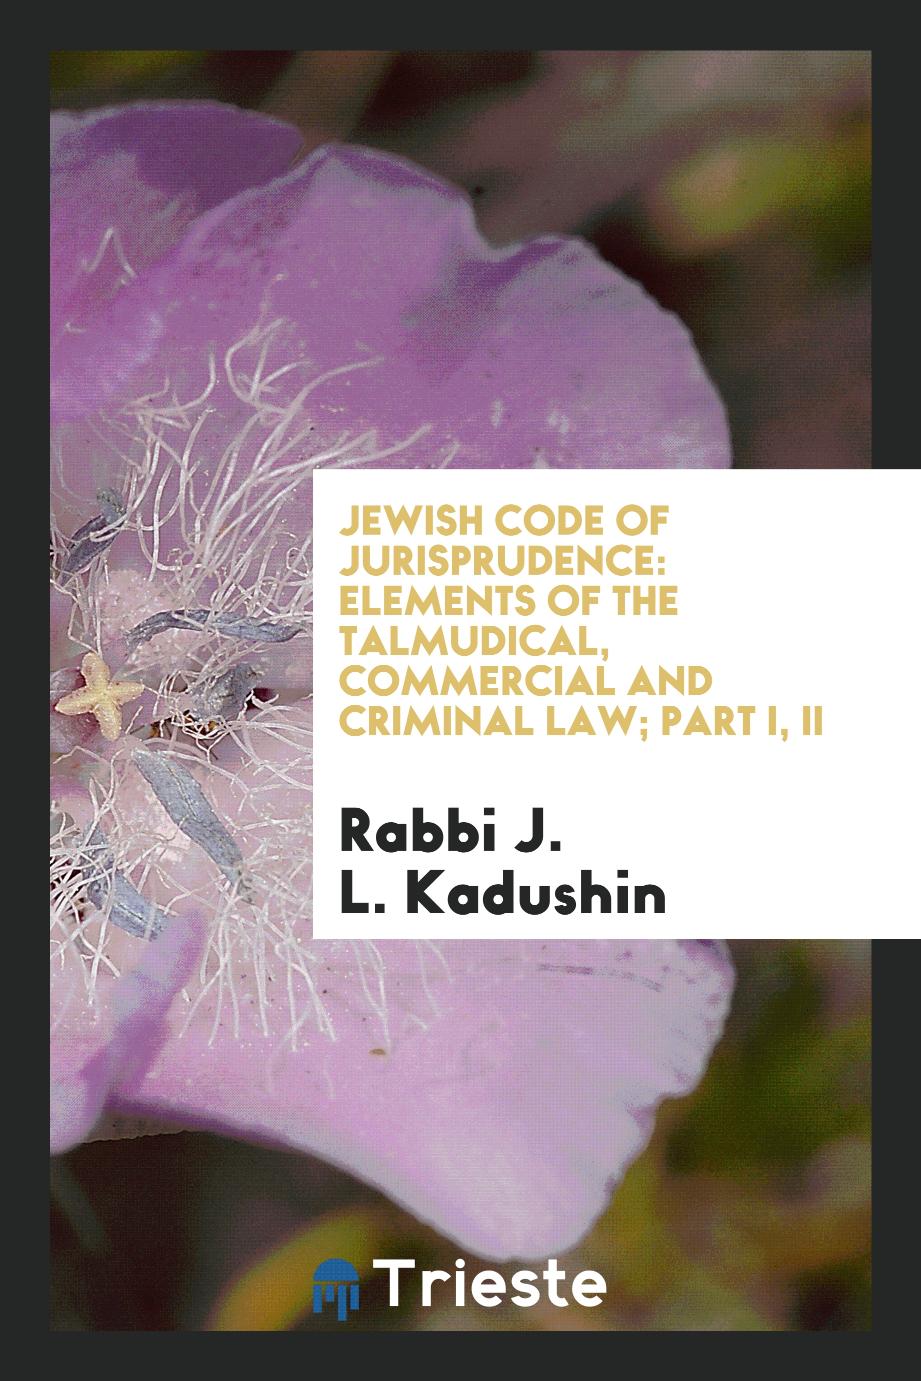 Jewish code of jurisprudence: elements of the Talmudical, commercial and criminal law; Part I, II